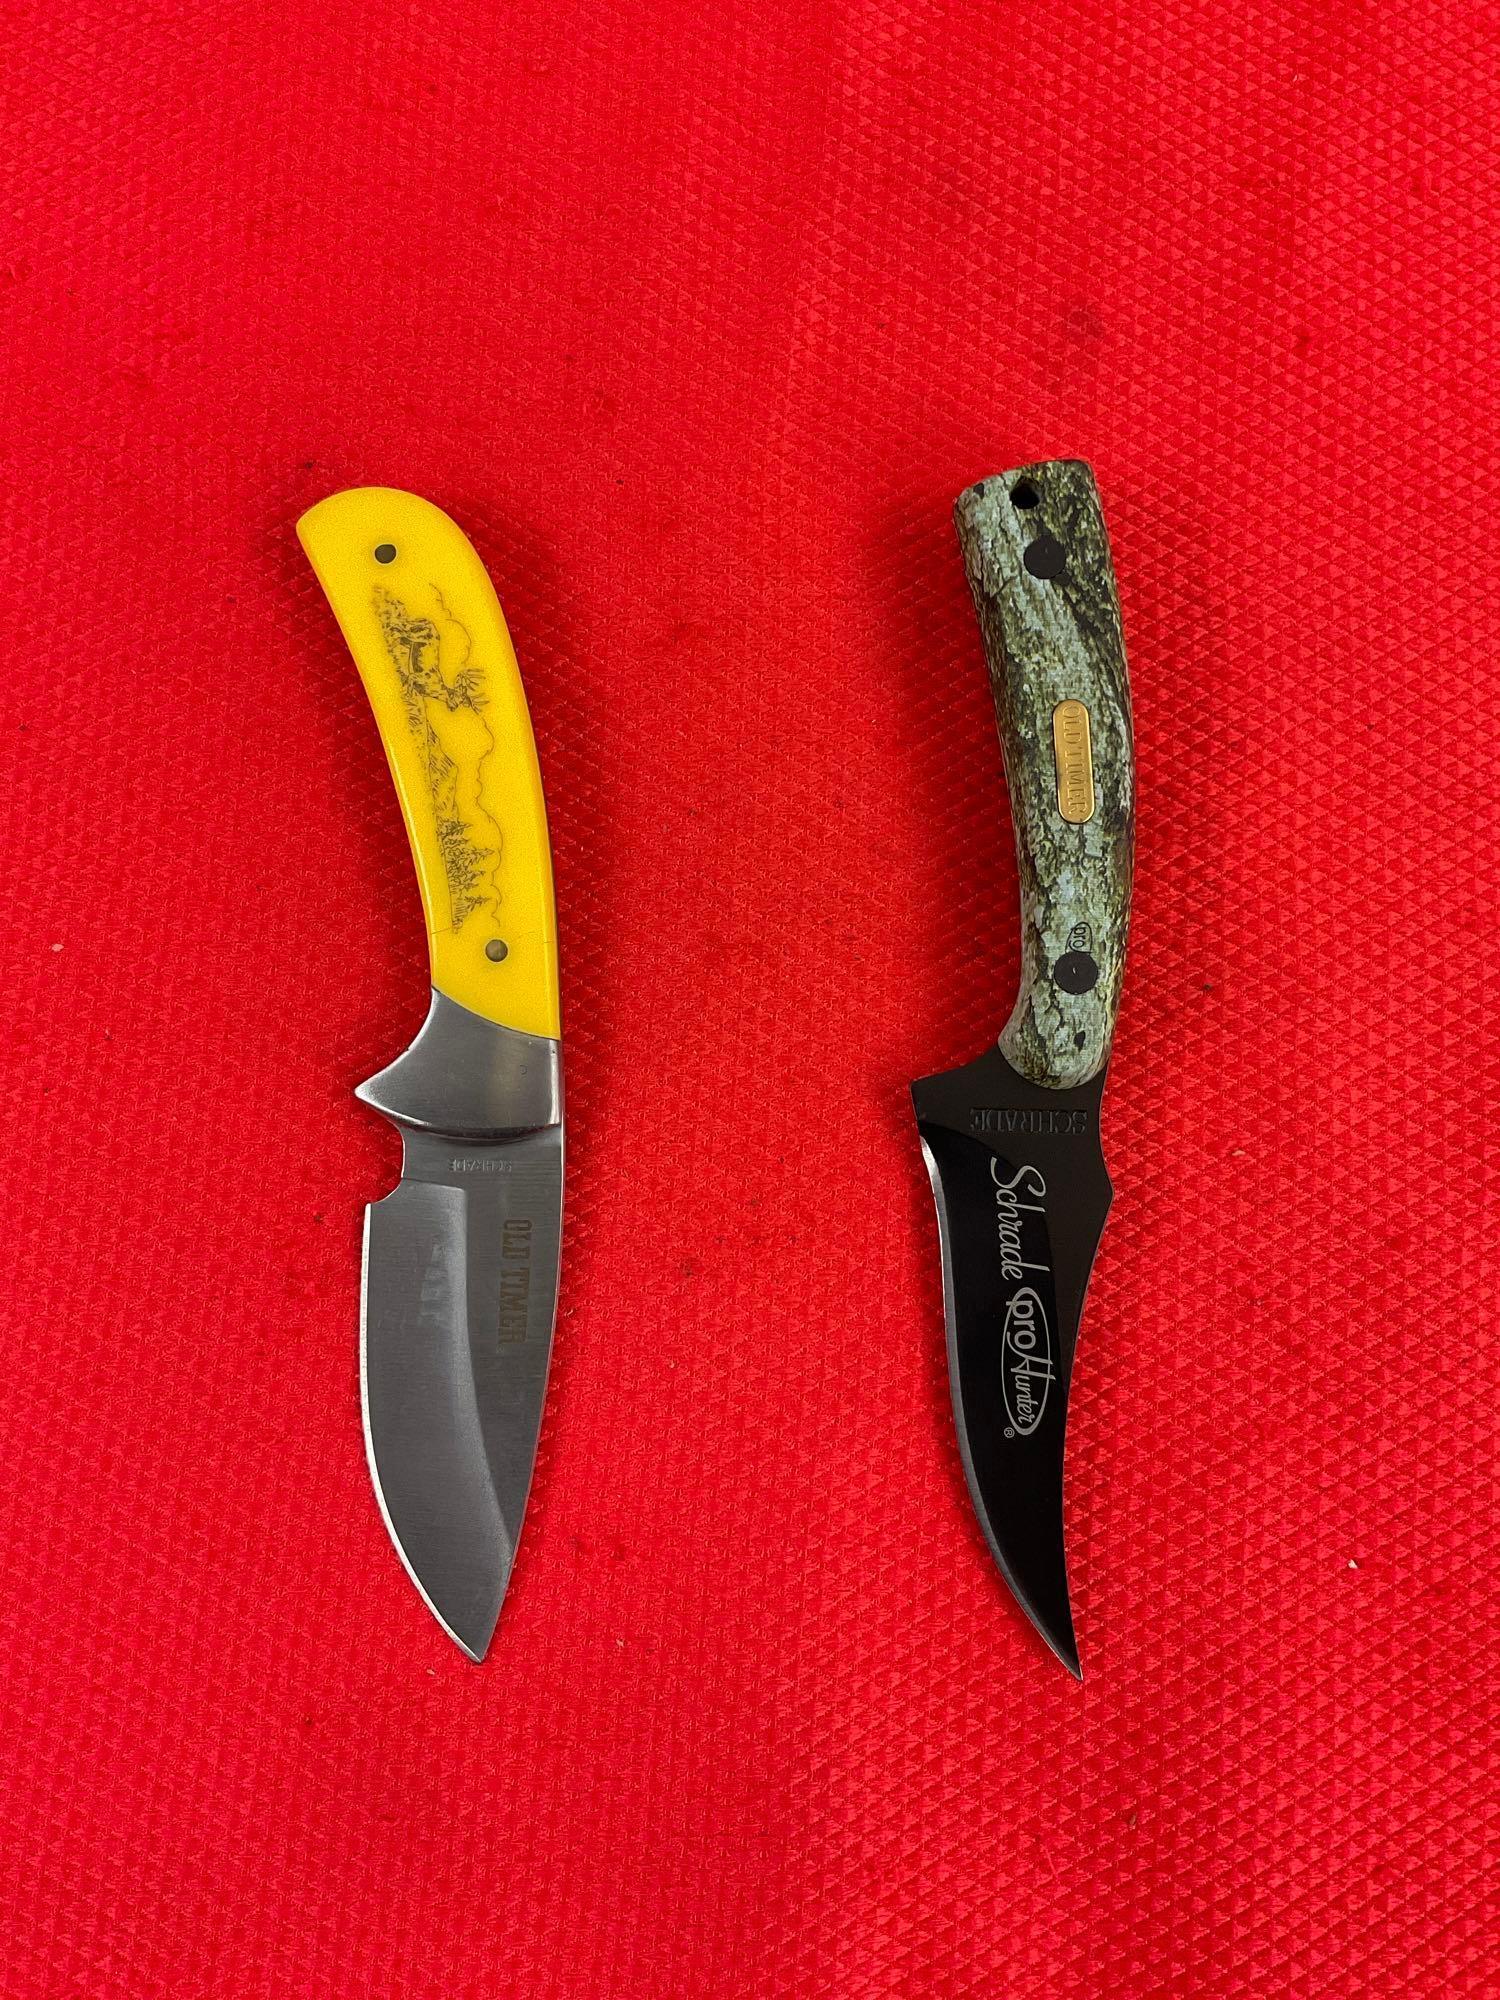 2 pcs Modern Schrade Steel Fixed Blade Hunting Knives Models 17-27 & 152OTBC w/ Sheathes. See pics.